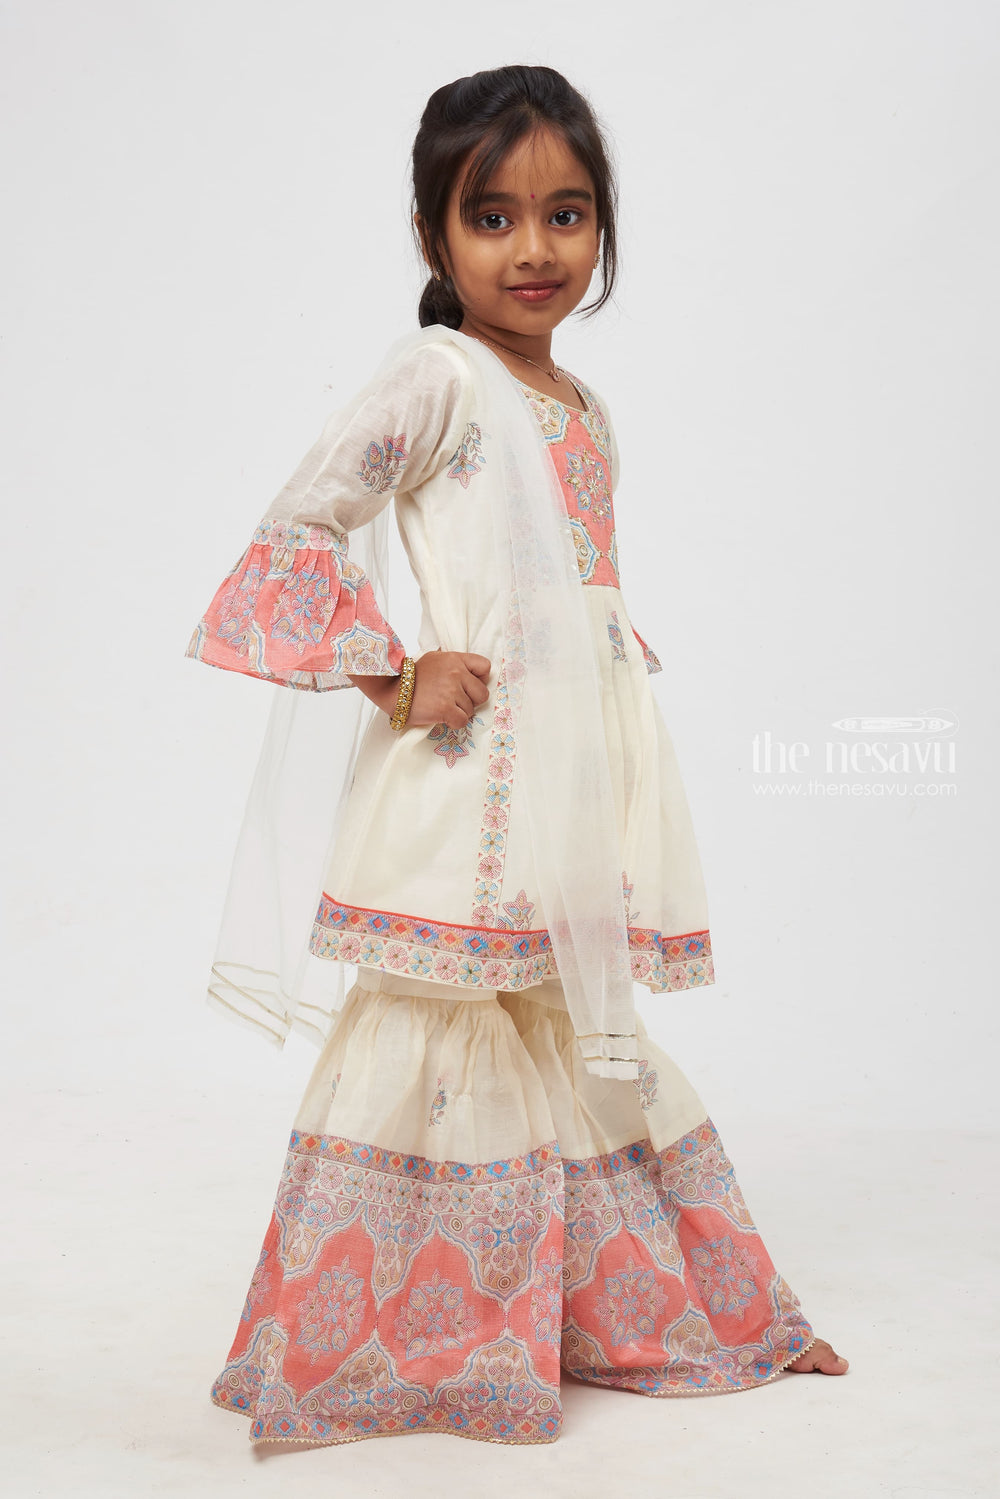 The Nesavu Girls Sharara / Plazo Set Graceful Tile-Inspired Ensemble for Kids: White and Pink Floral Printed Stylish Kurti with Sharara Pant Set Nesavu Kids Graceful Tile-Inspired Ensemble | Off-White with Coral and Muted Blue Details | Elegant Festive Wear